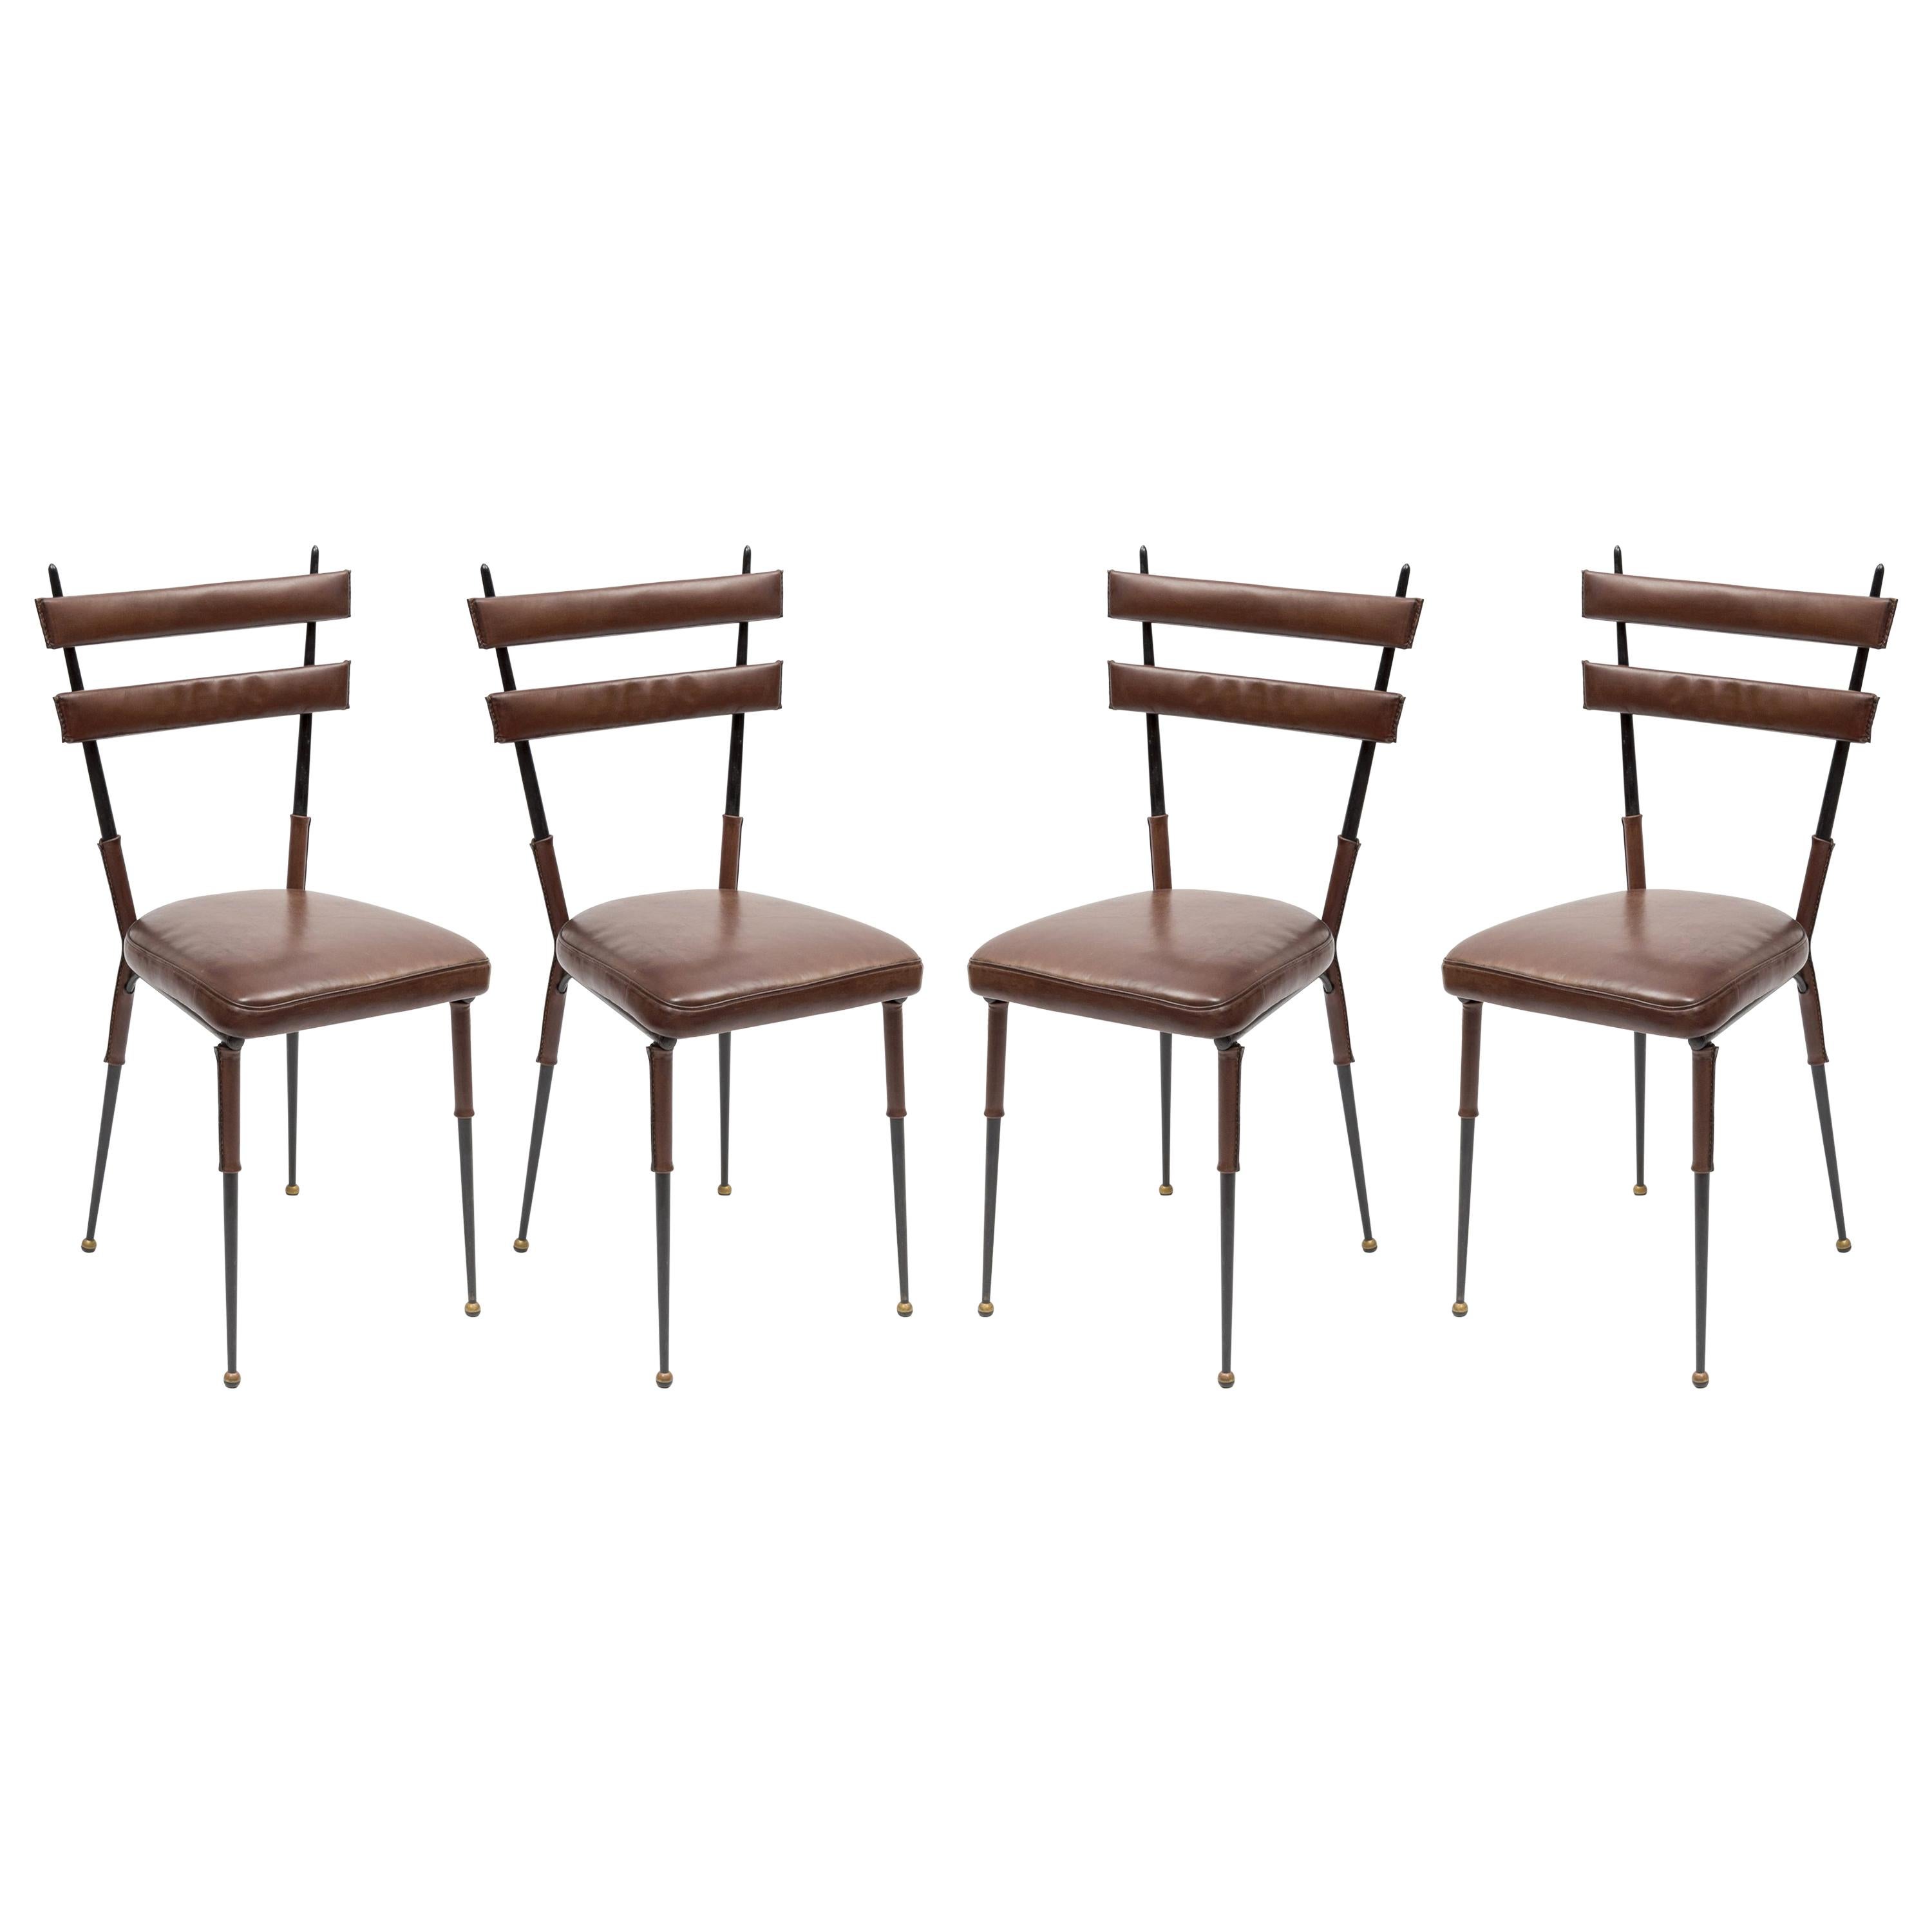 Set of 4 Chairs in Stitched Leather by Jacques Adnet